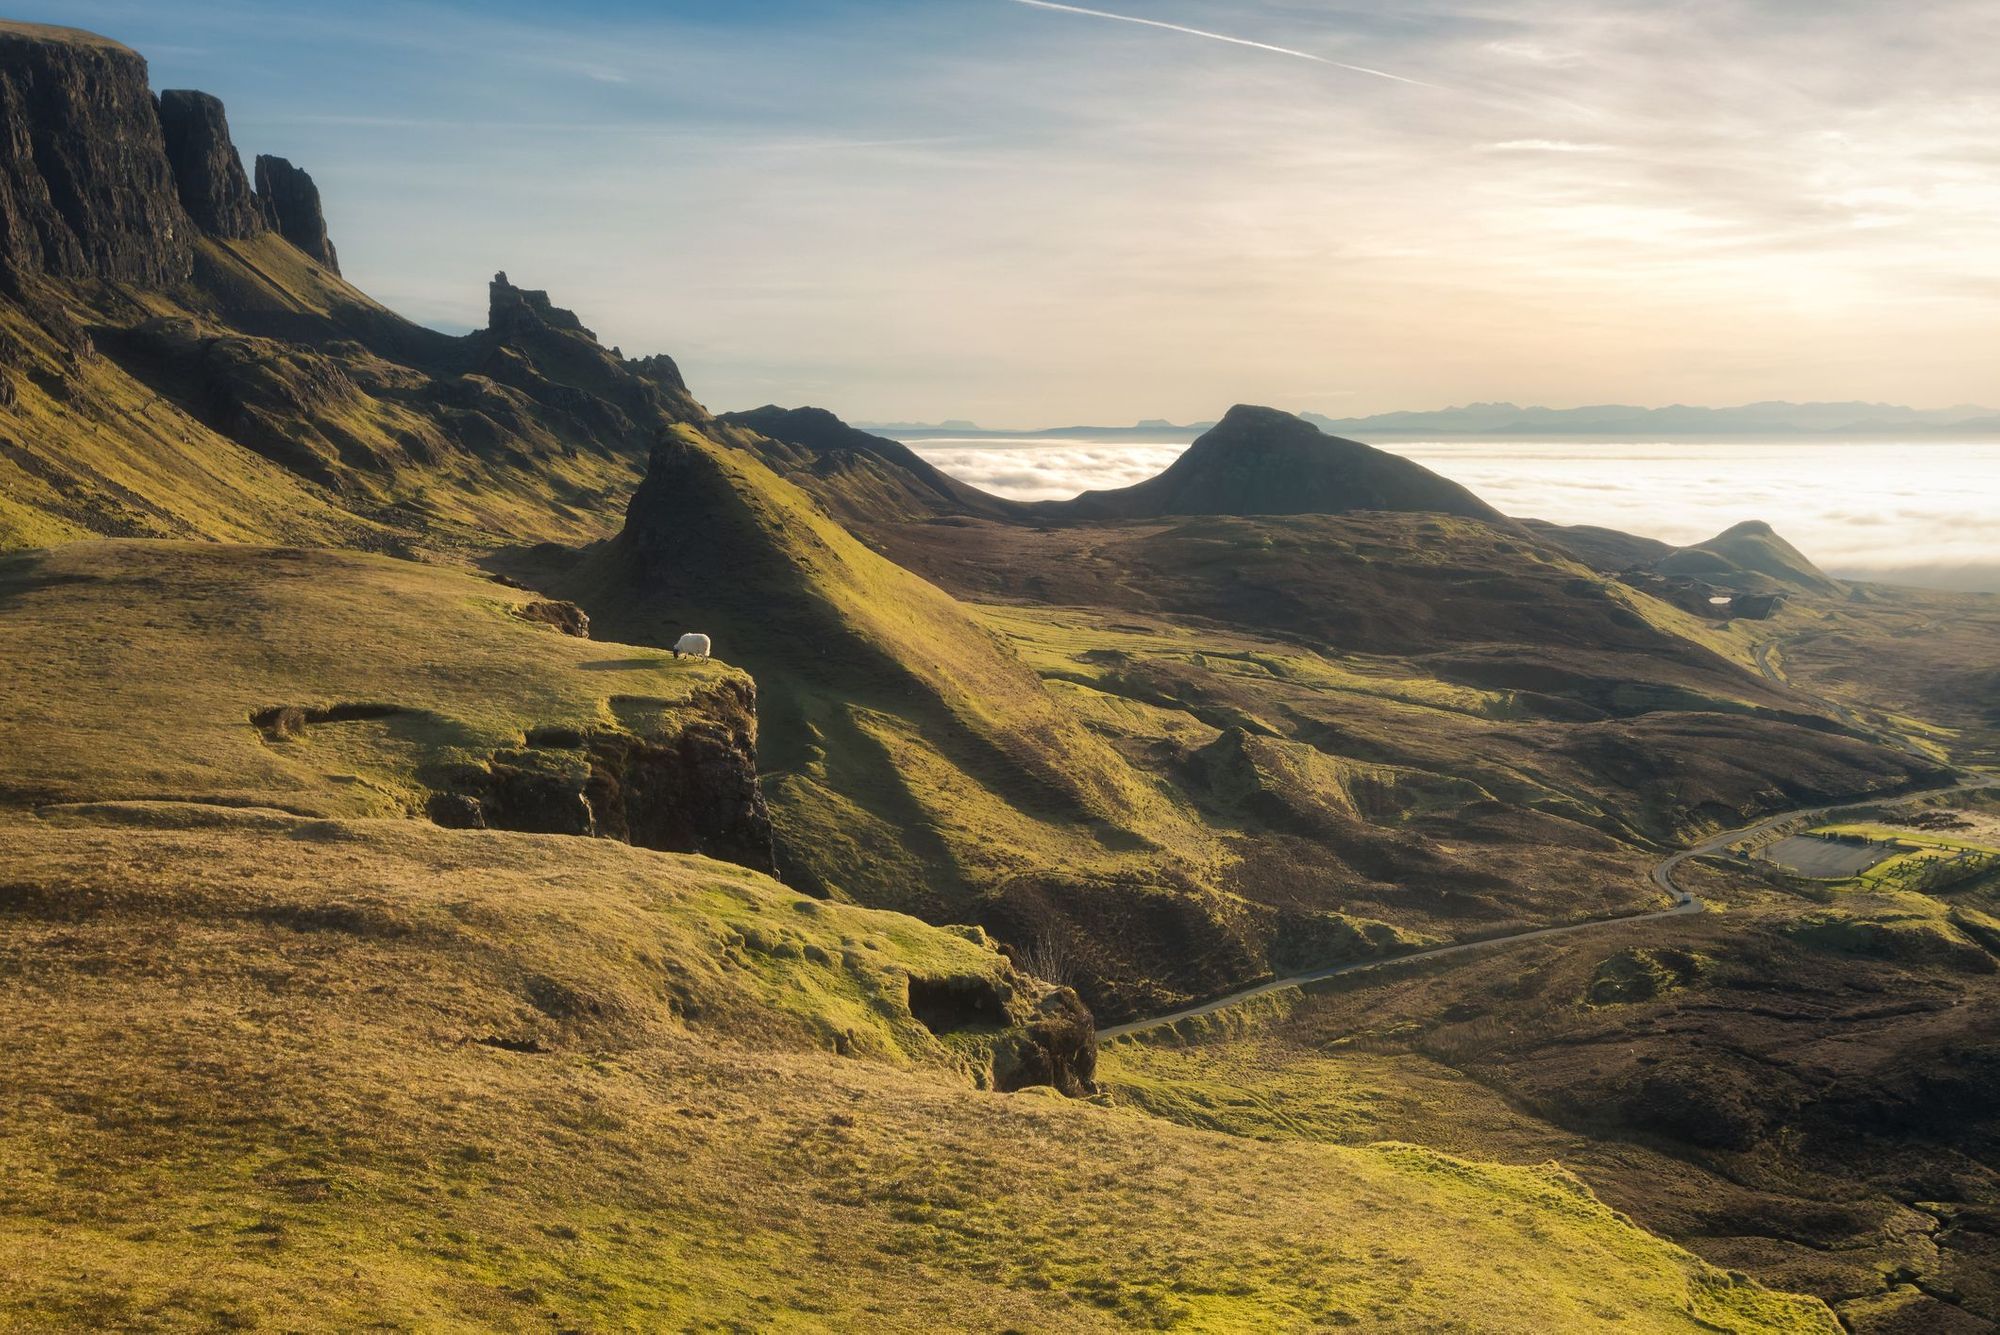 The Quiraing, a picturesque area on the Isle of Skye